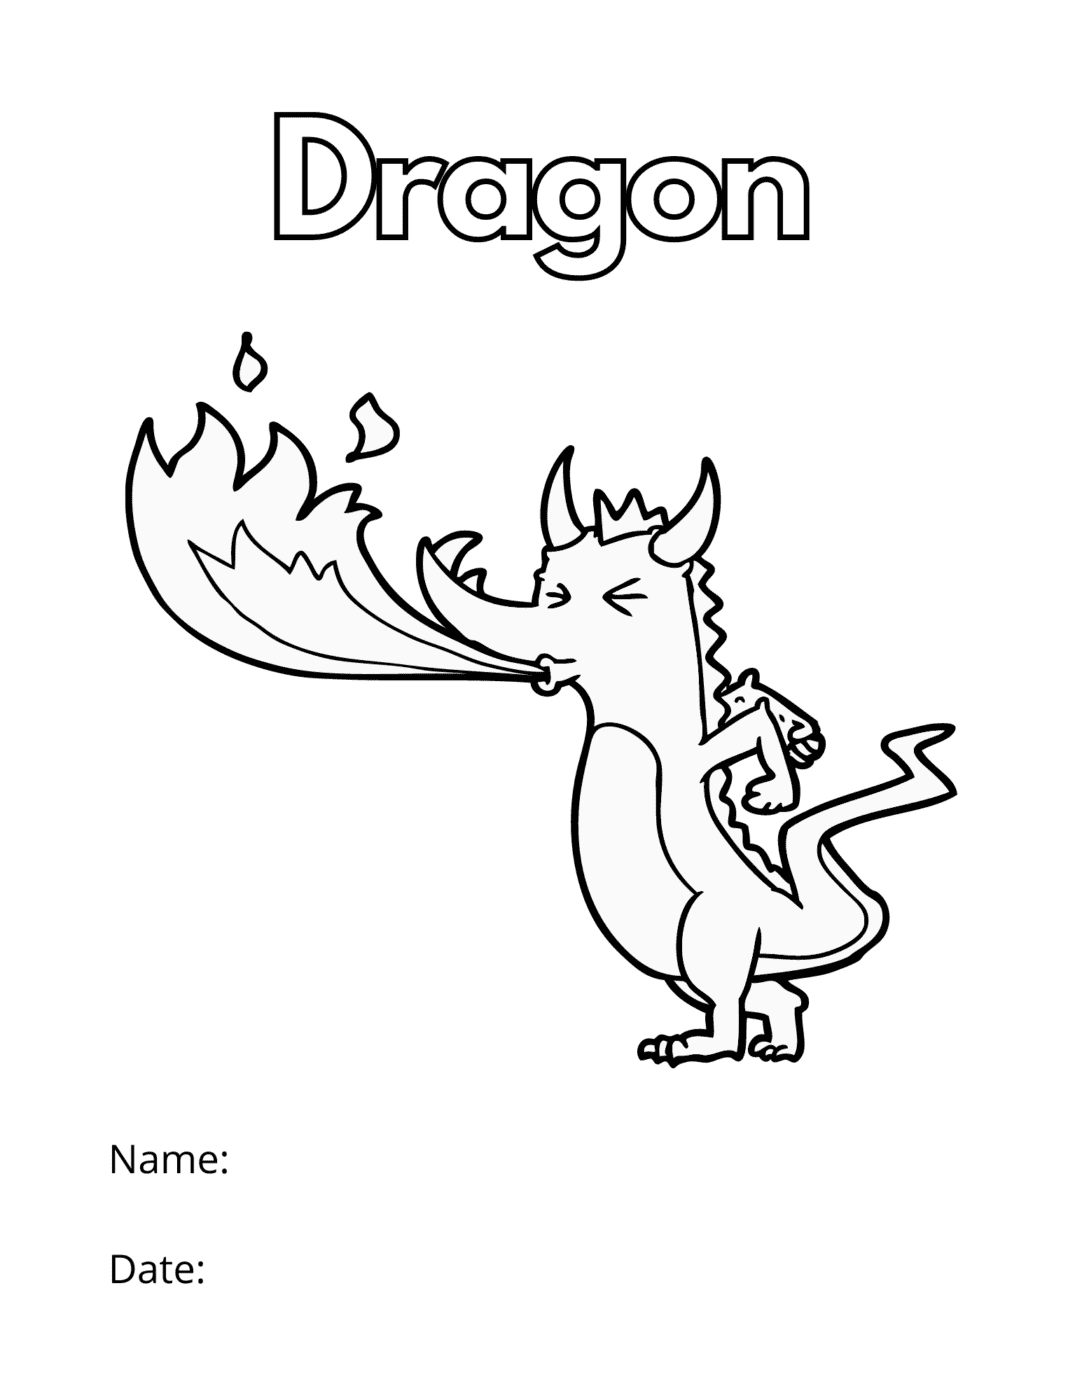 Dragon coloring pages 1